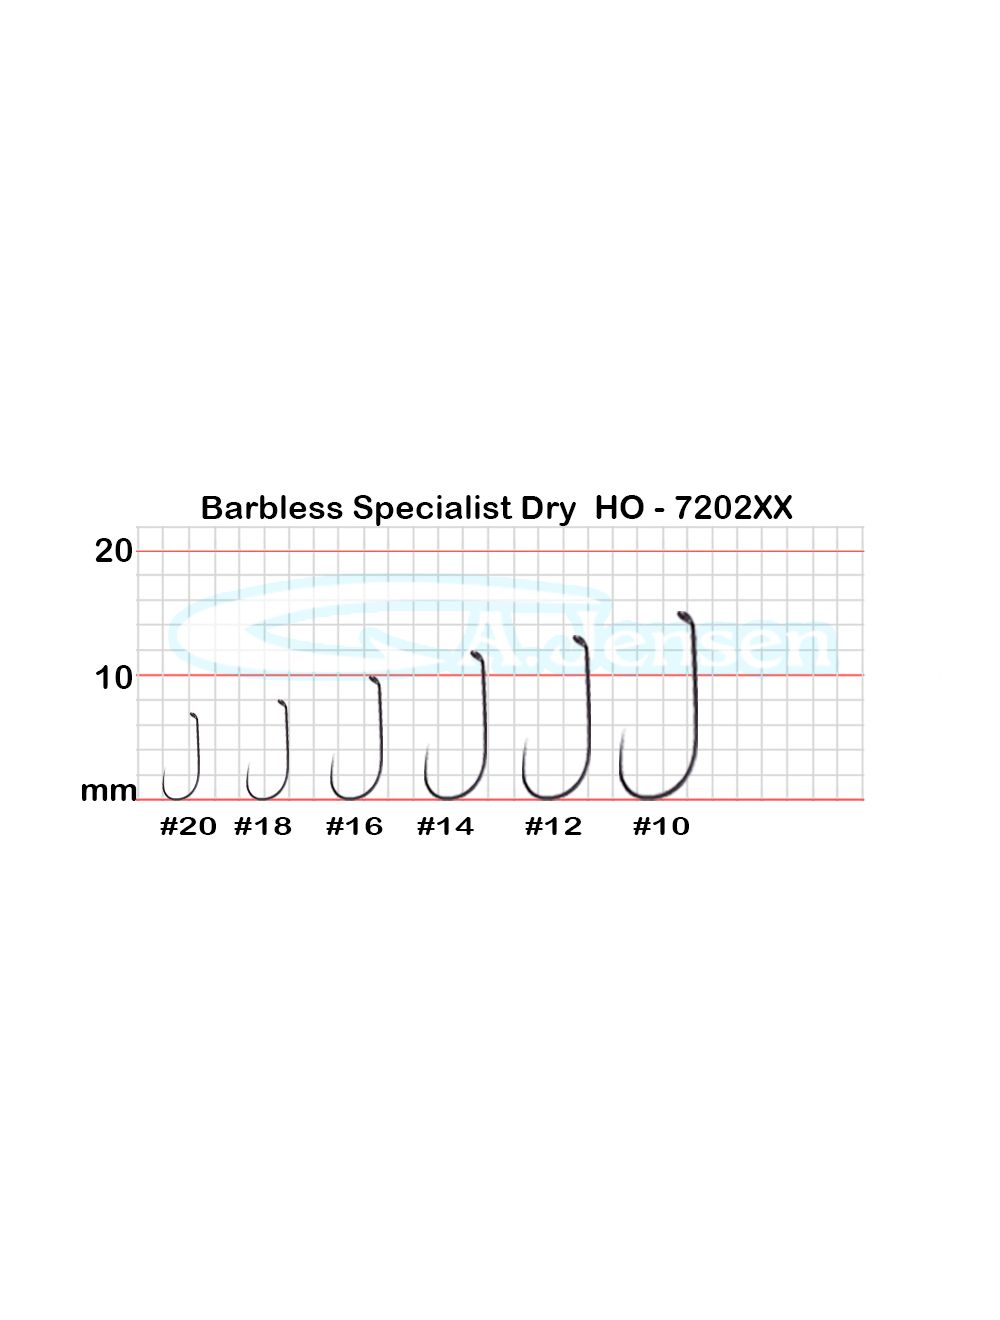 Barbless Specialist dry